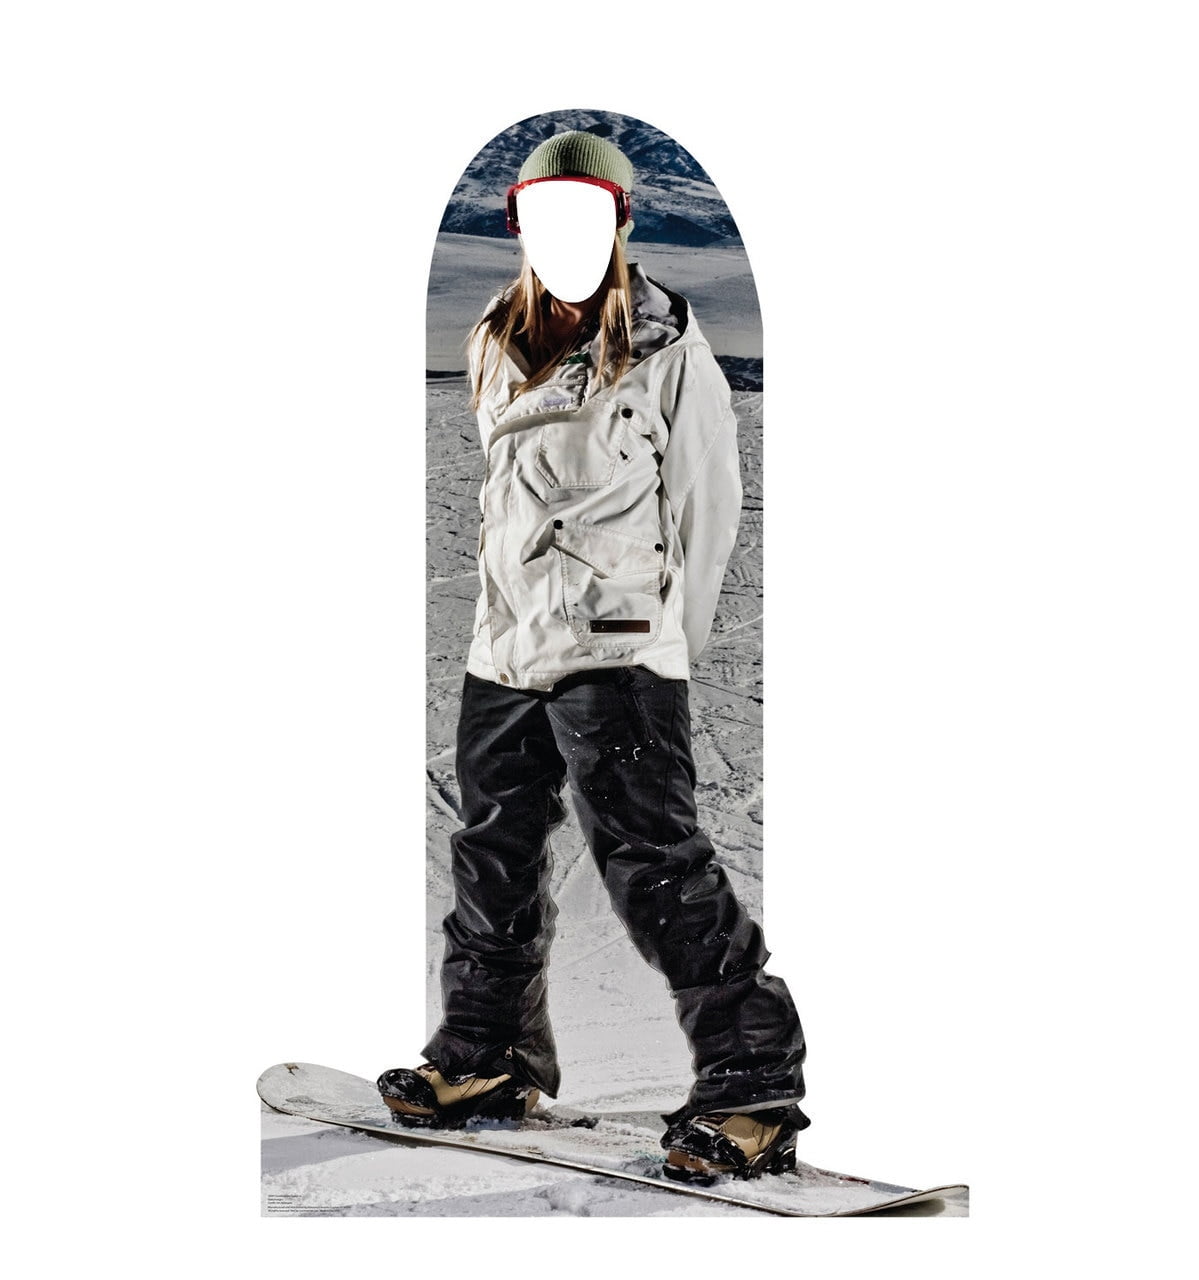 2669 42 X 65 In. Snowboarder Standin Wall Decal